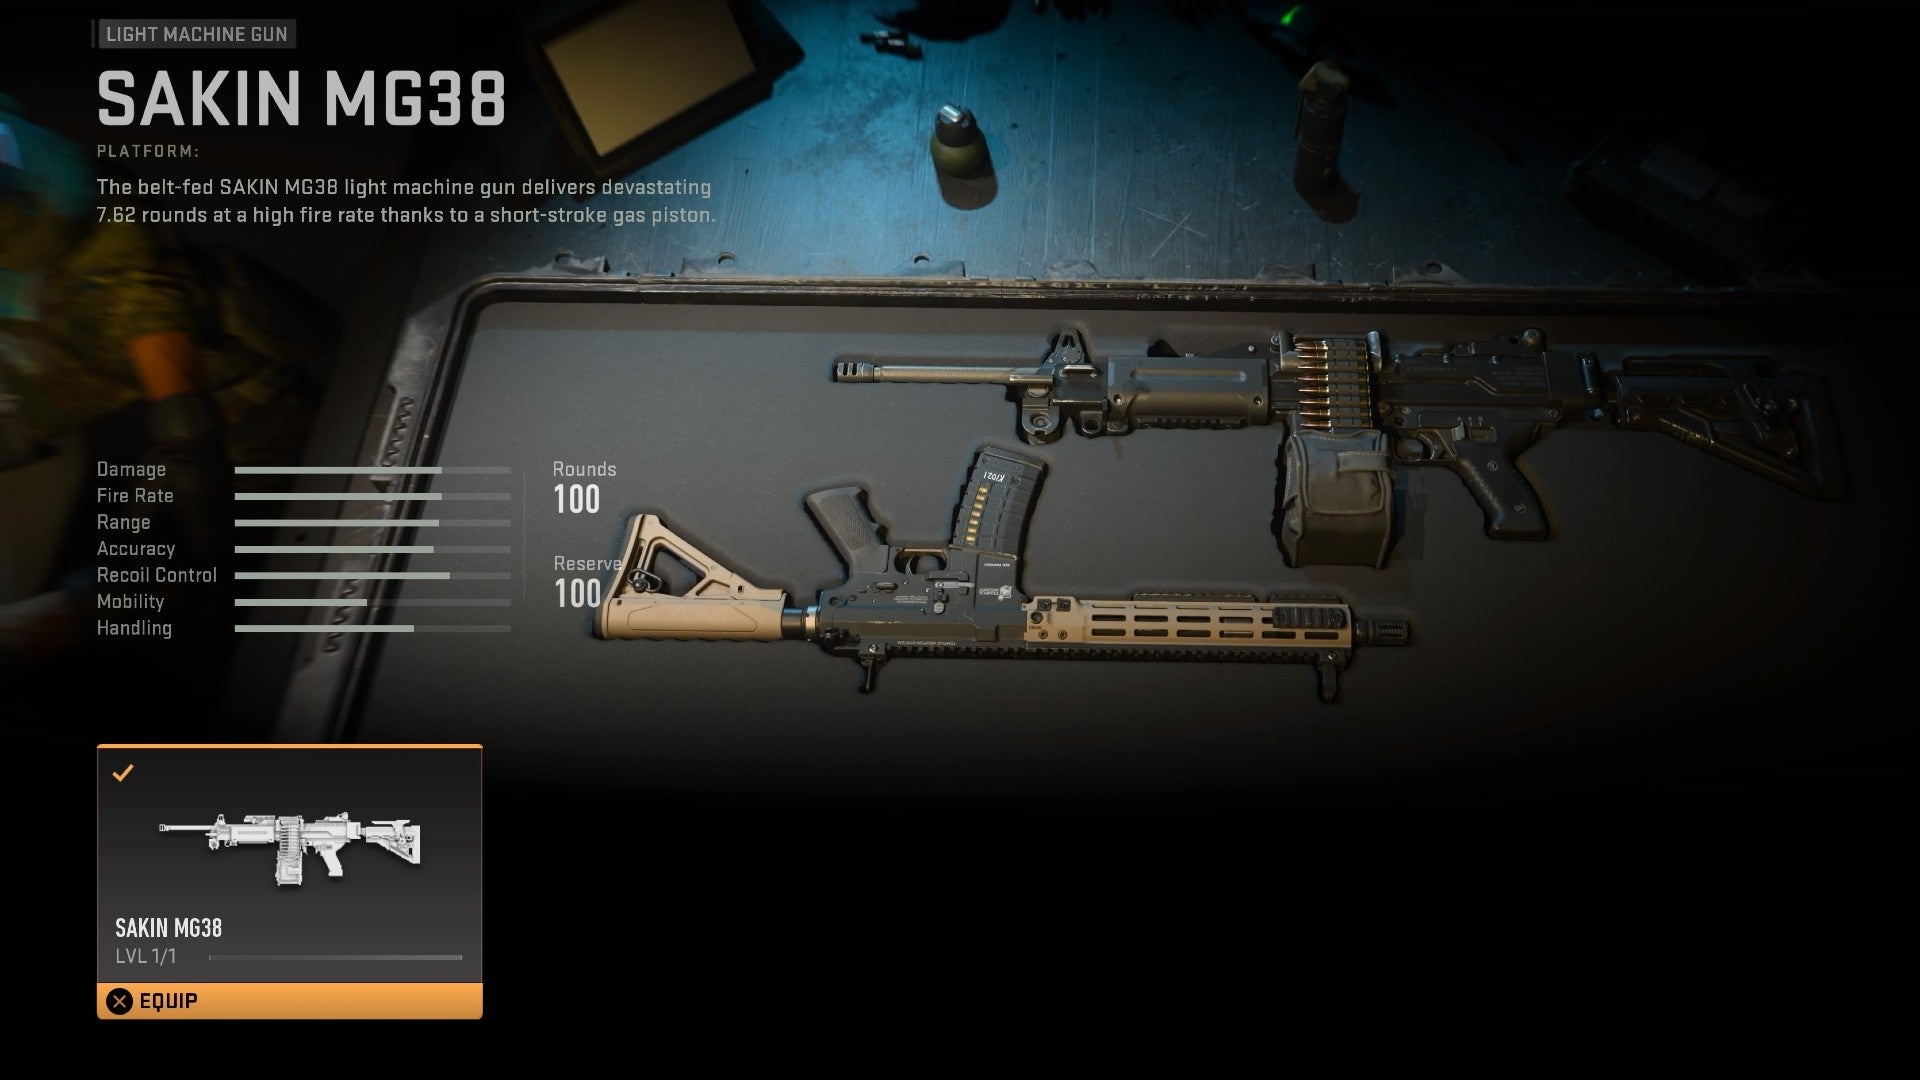 Modern Warfare 2 beta screenshot showing the Sakin LMG in a weapon container, with the stats on the left.